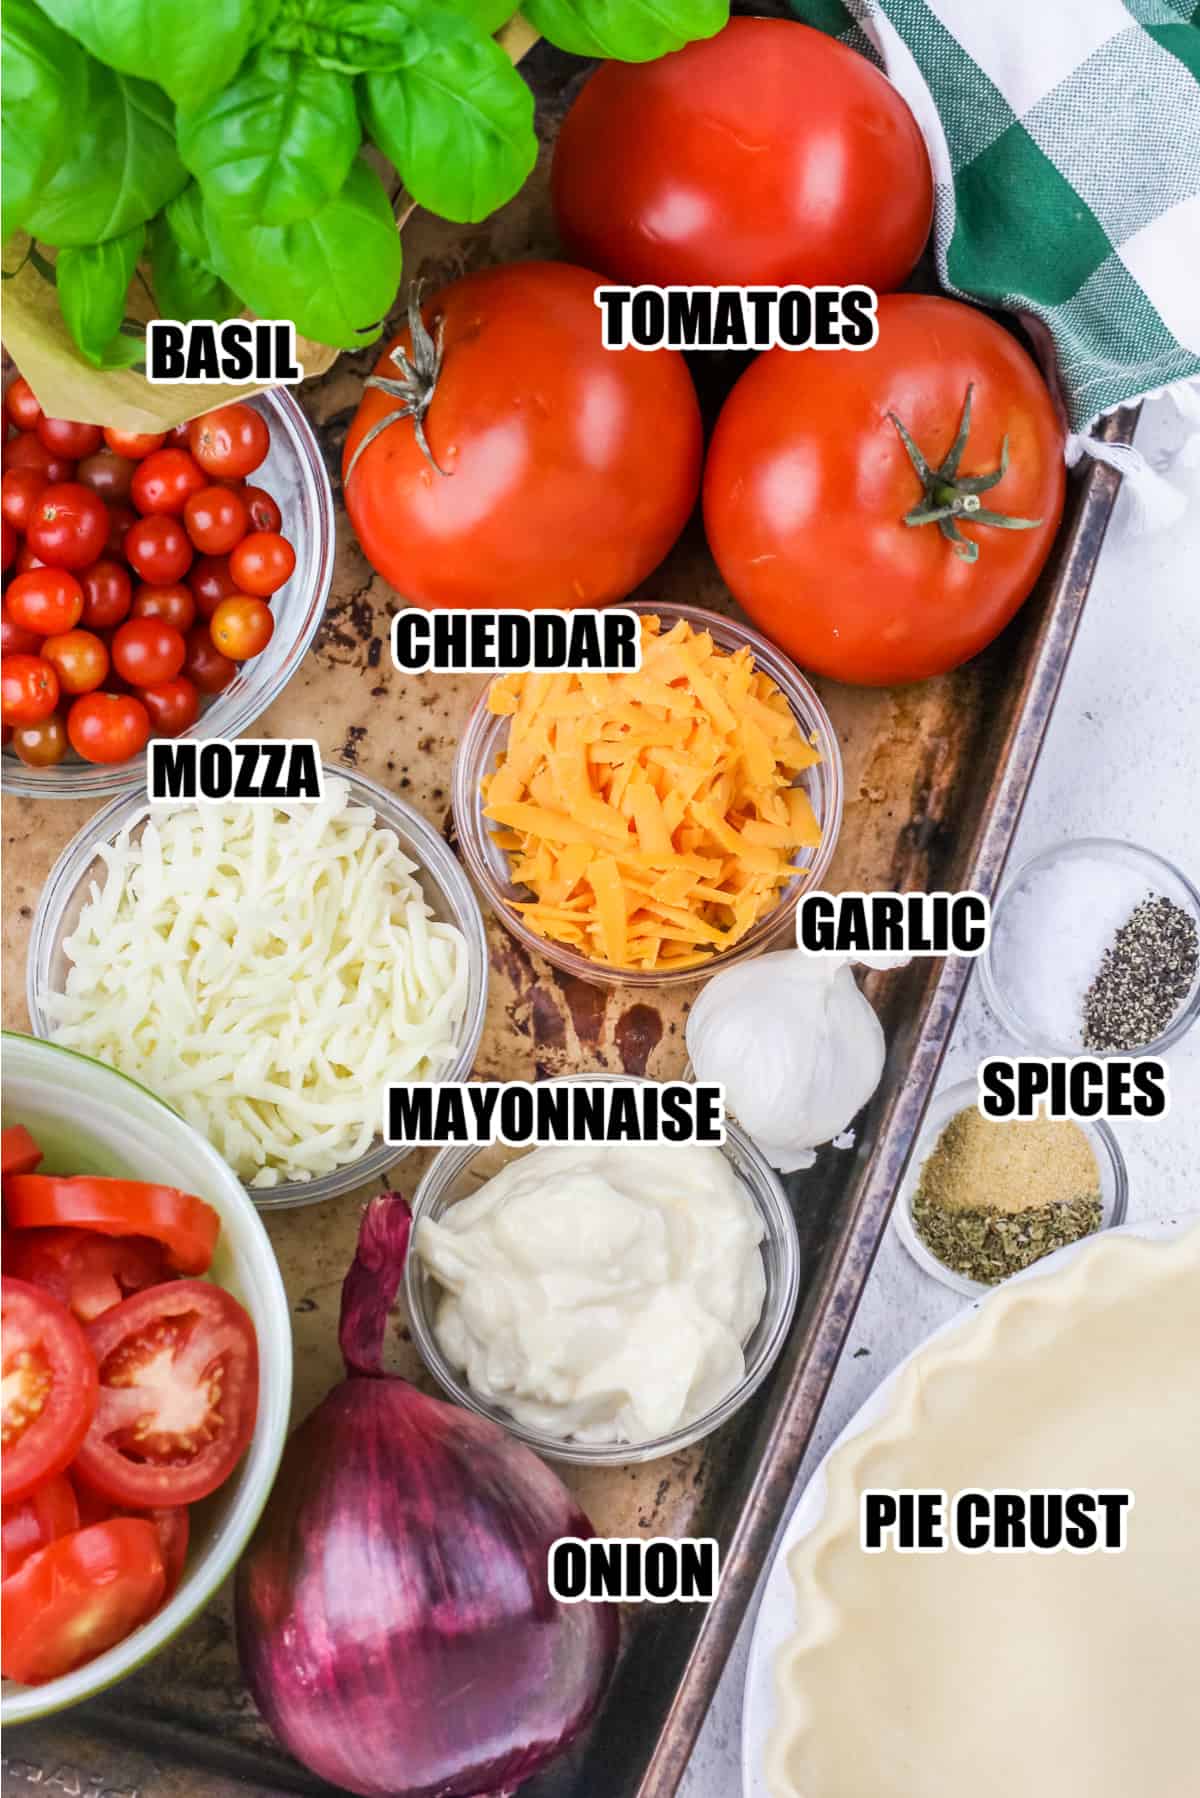 ingredients to make tomato pie including basil, tomatoes, cheddar, mozza, mayonnaise, garlic, spices, onion, and pie crust